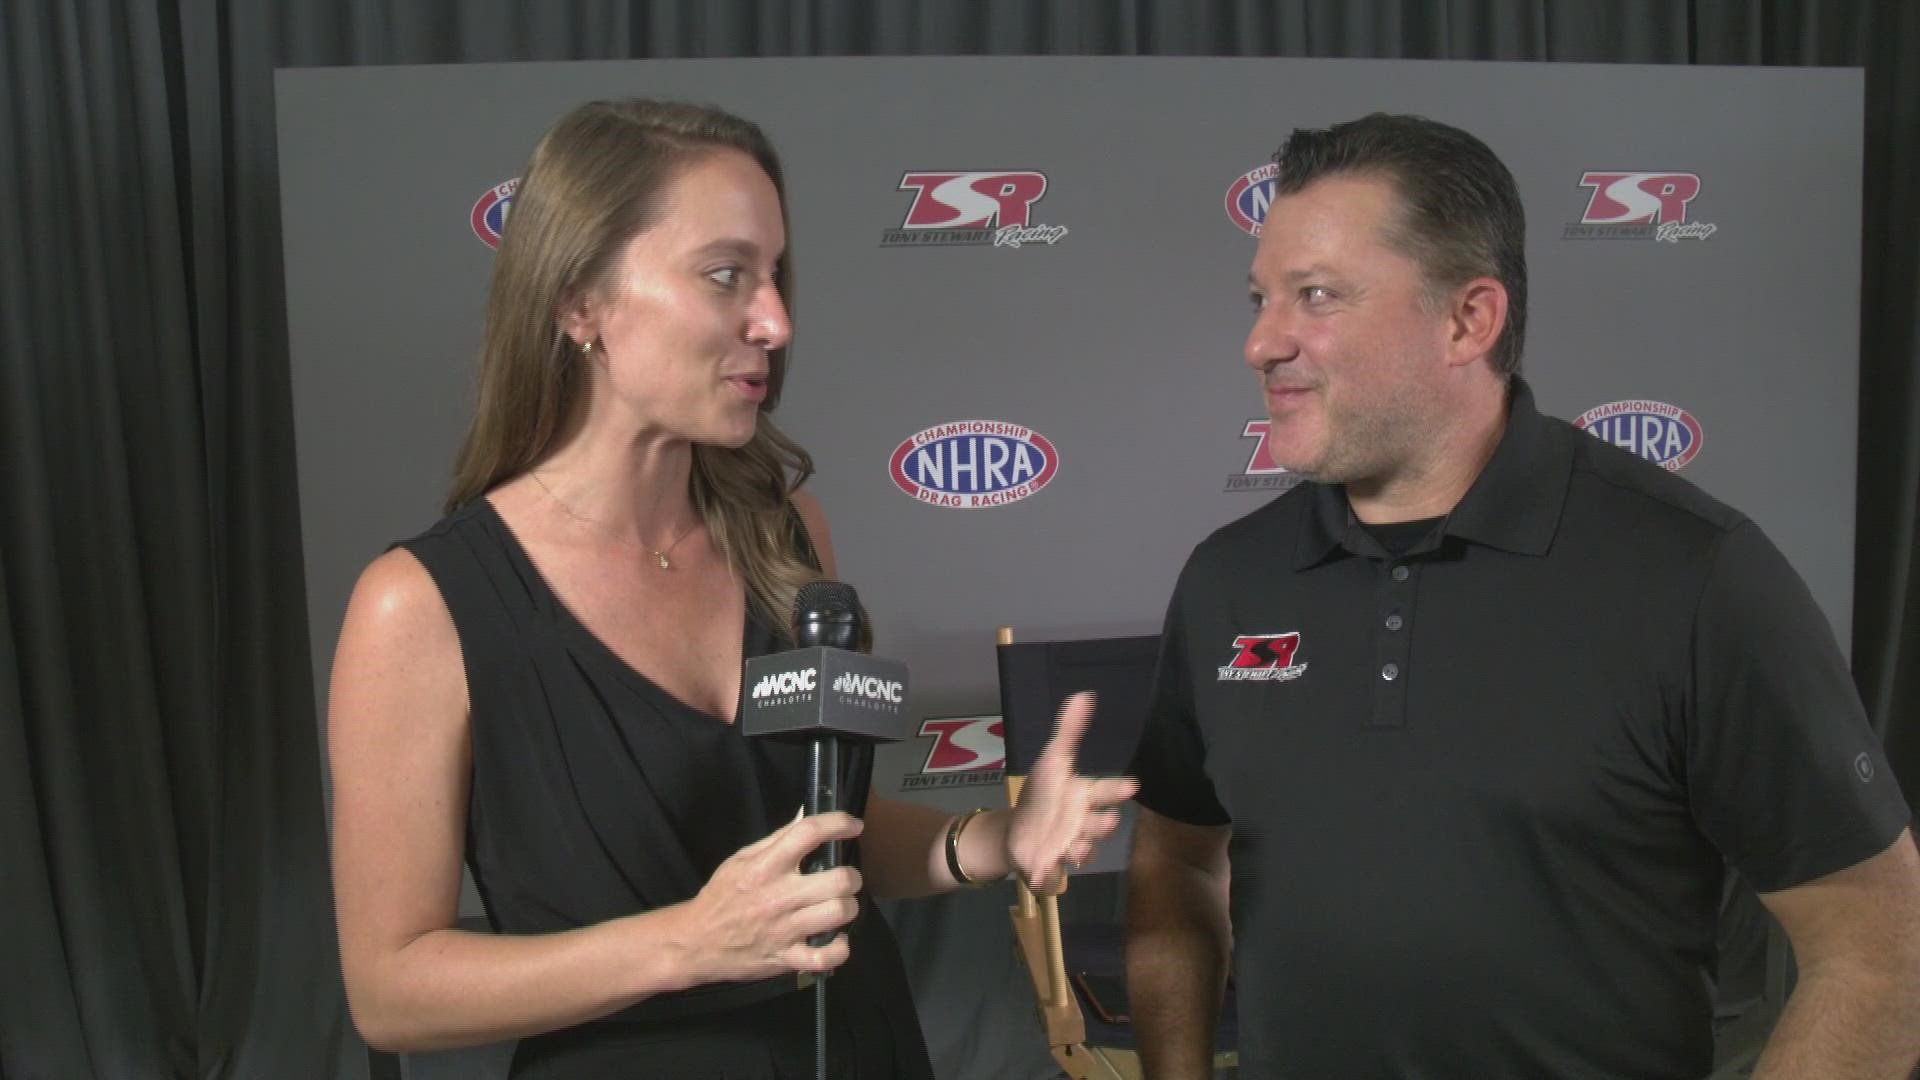 Ashley Stroehlein learns more about what Tony Stewart is up to.